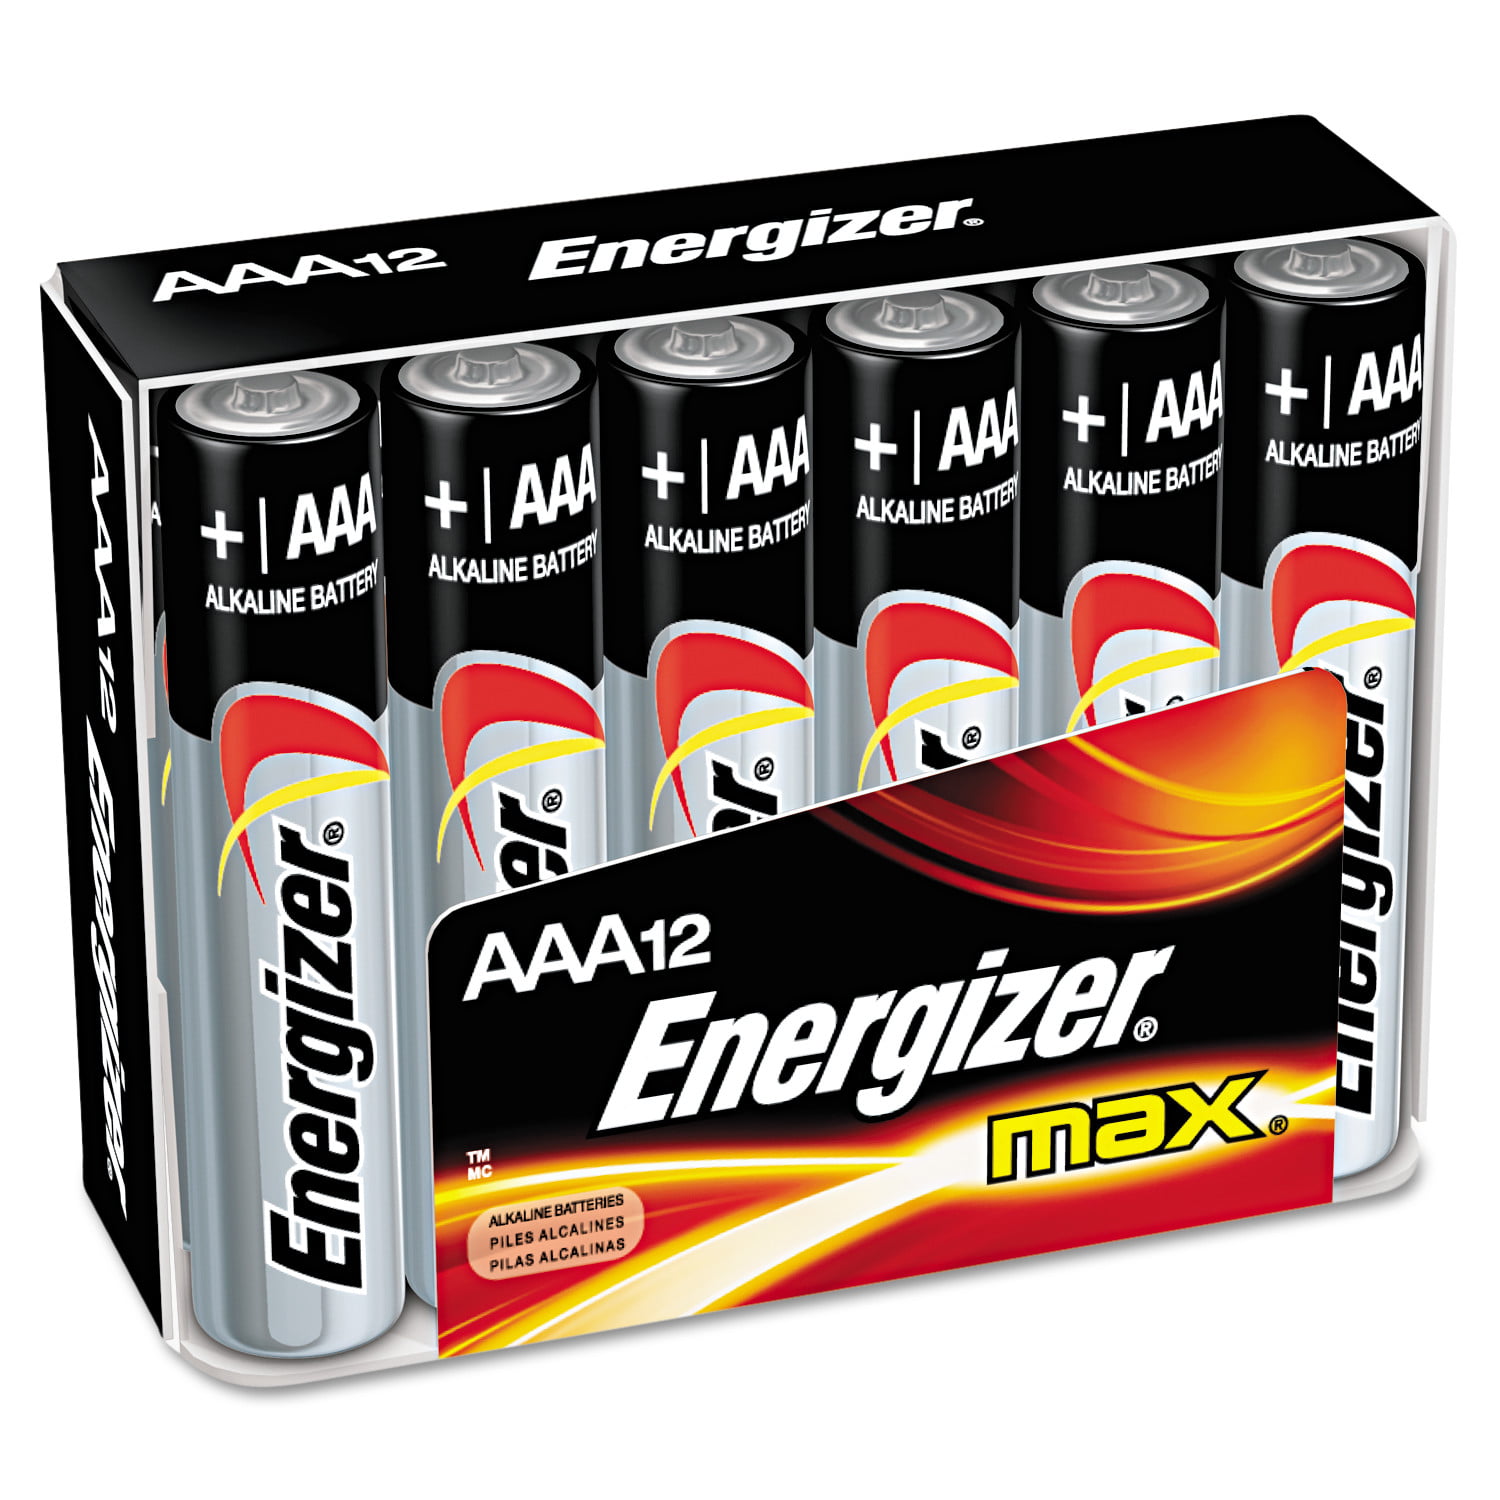 batteries by energizer